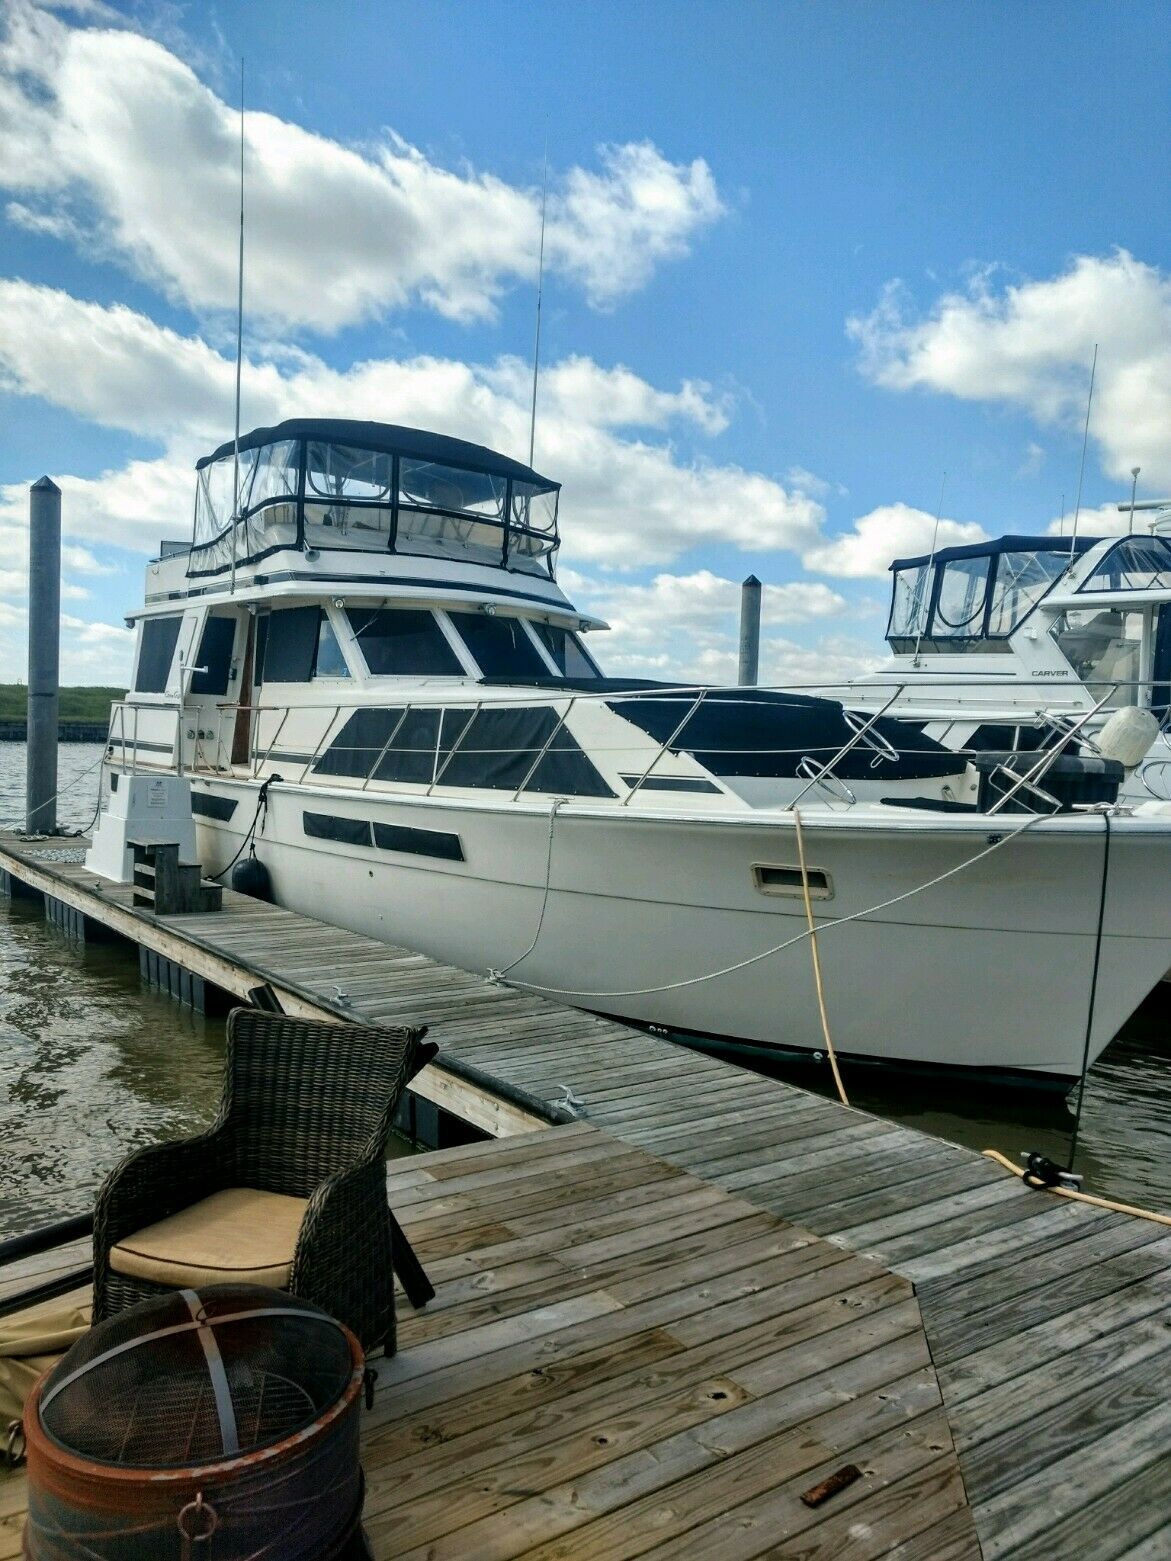 Chris Craft 500 Constellation 1985 for sale for $95,000 - Boats-from ...